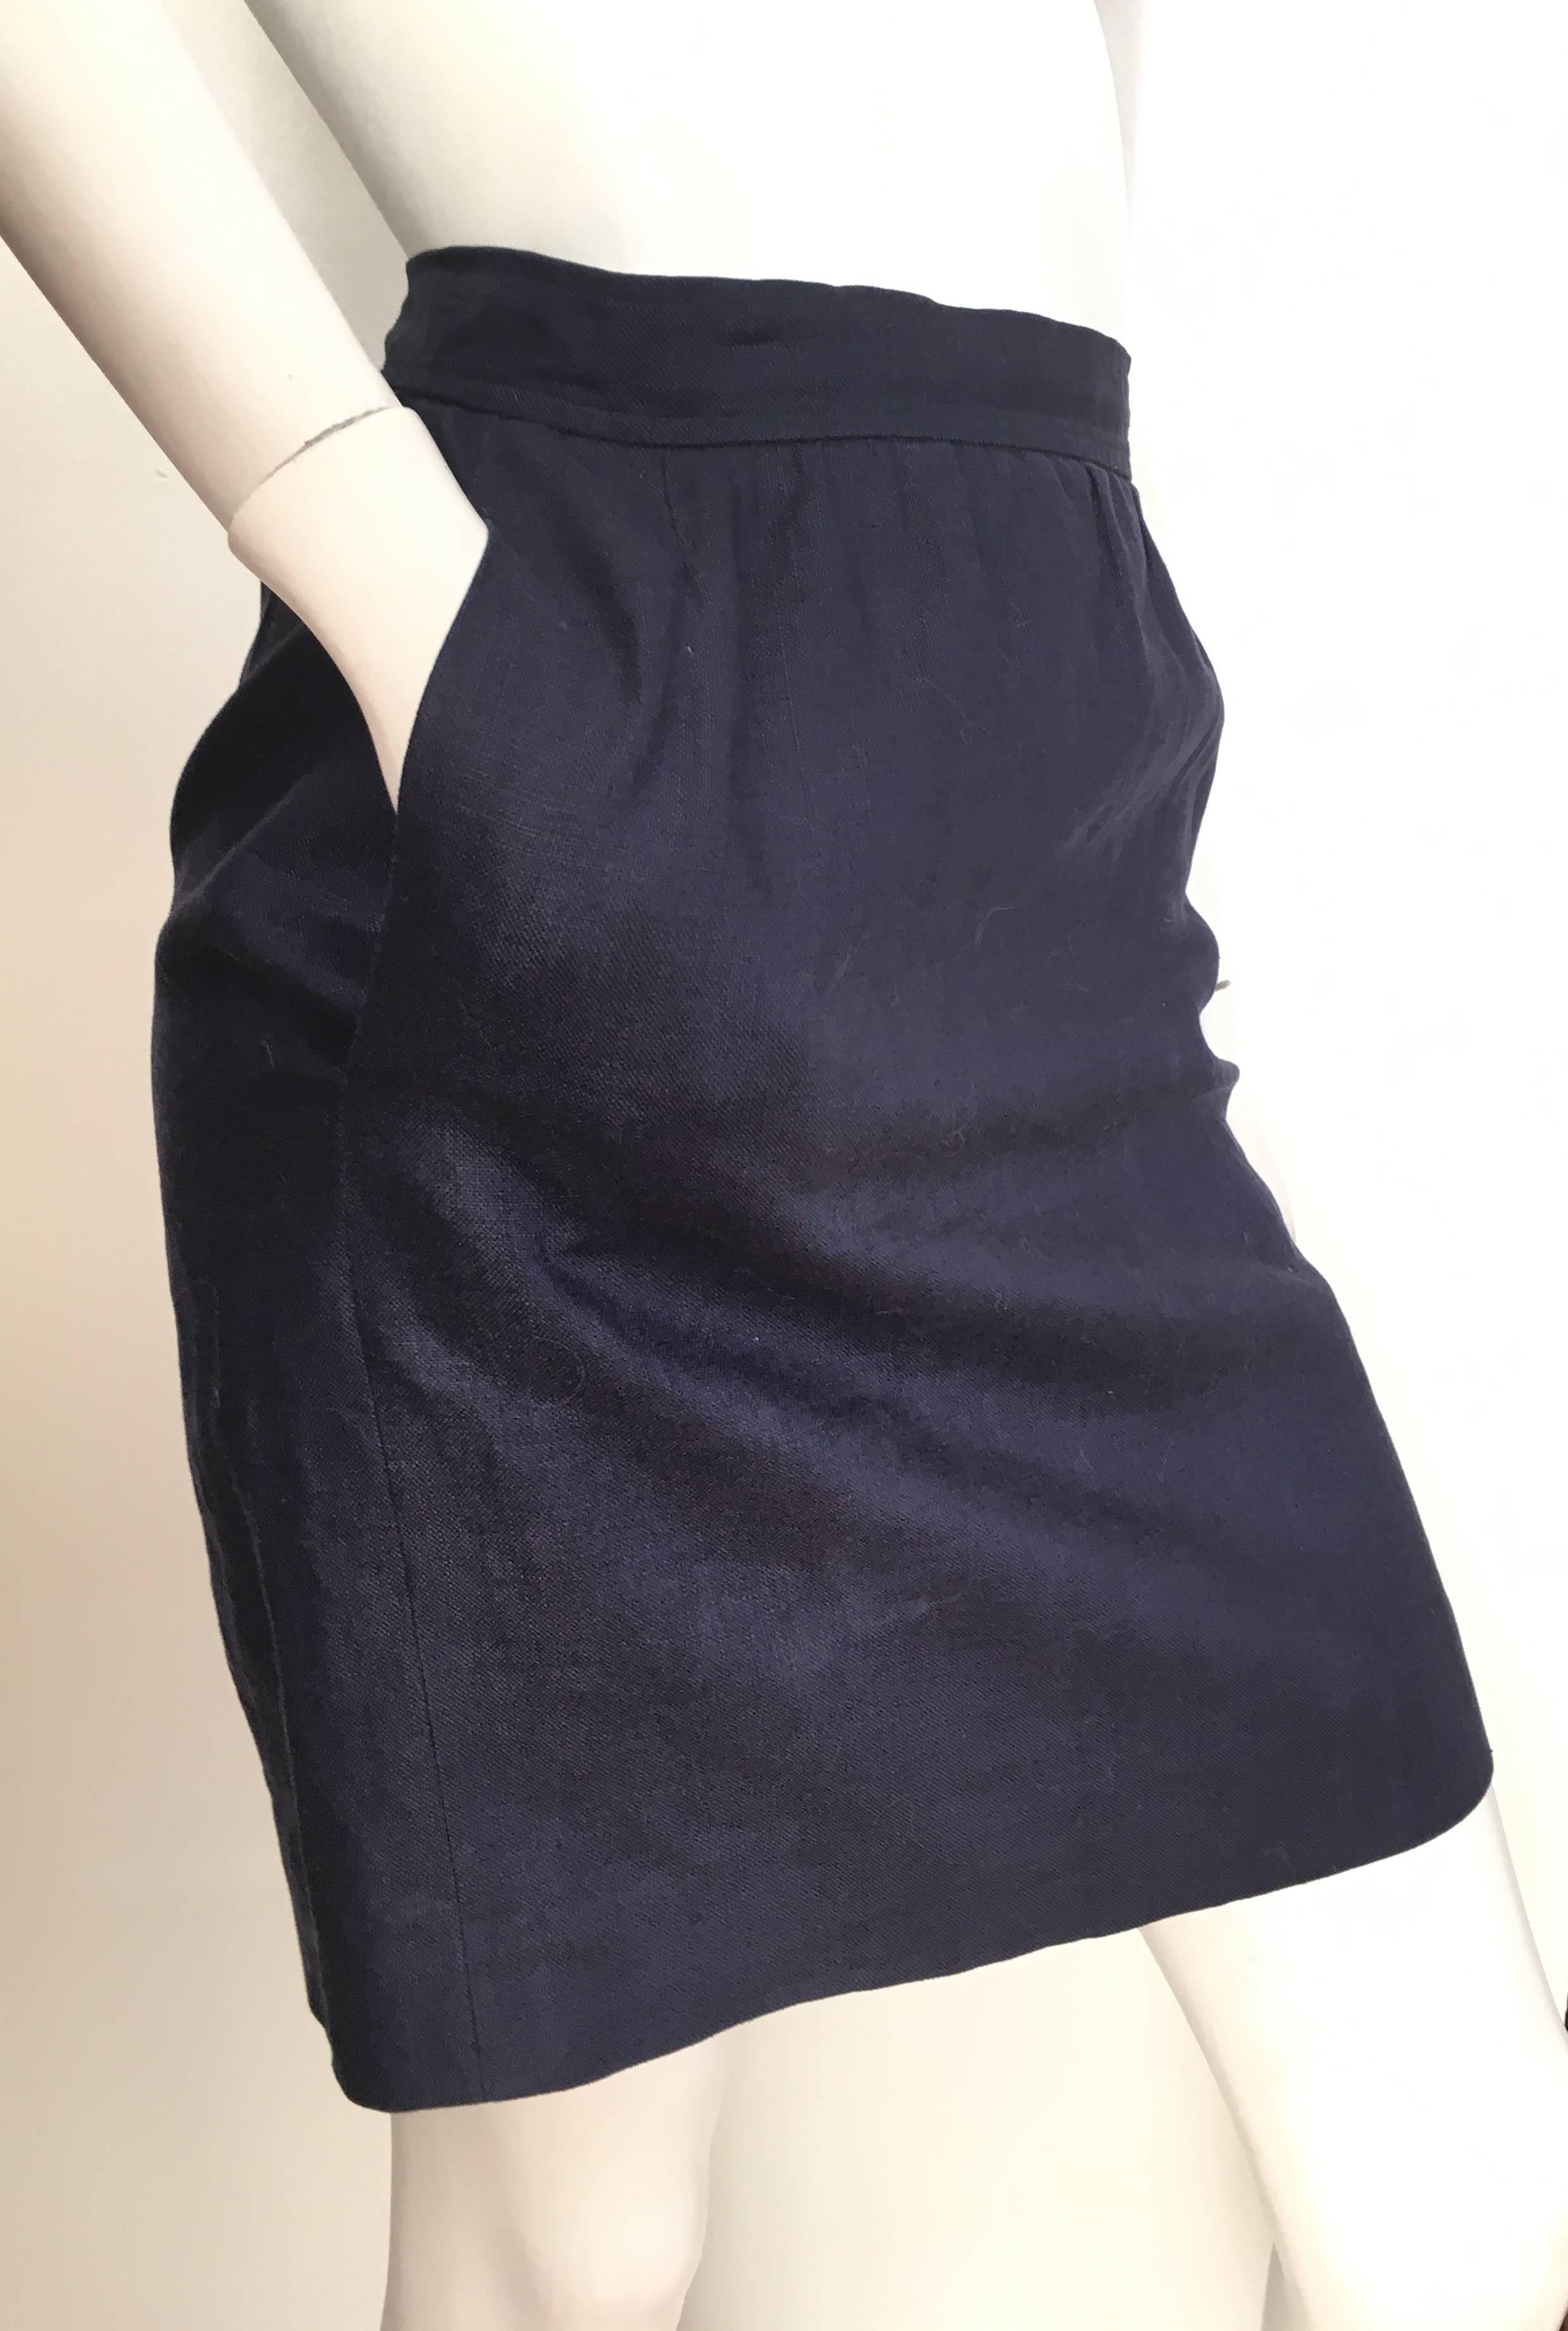 Saint Laurent Rive Gauche 1980s Navy Linen Pencil Skirt with Pockets Size 4. In Excellent Condition For Sale In Atlanta, GA